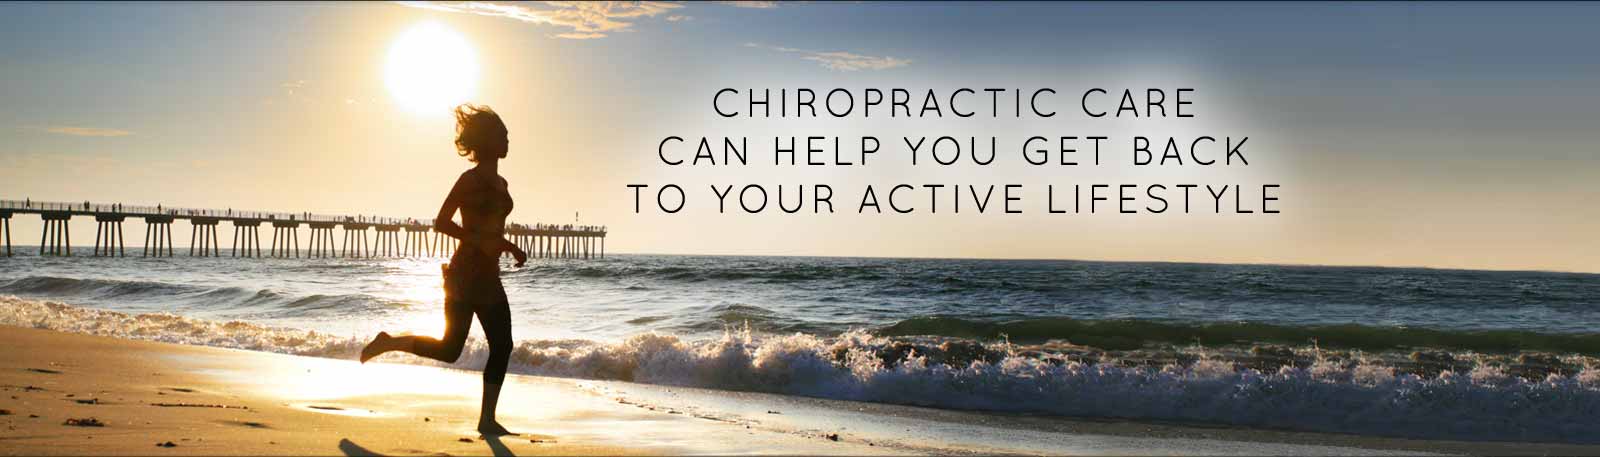 Chiropractic care for an active lifestyle